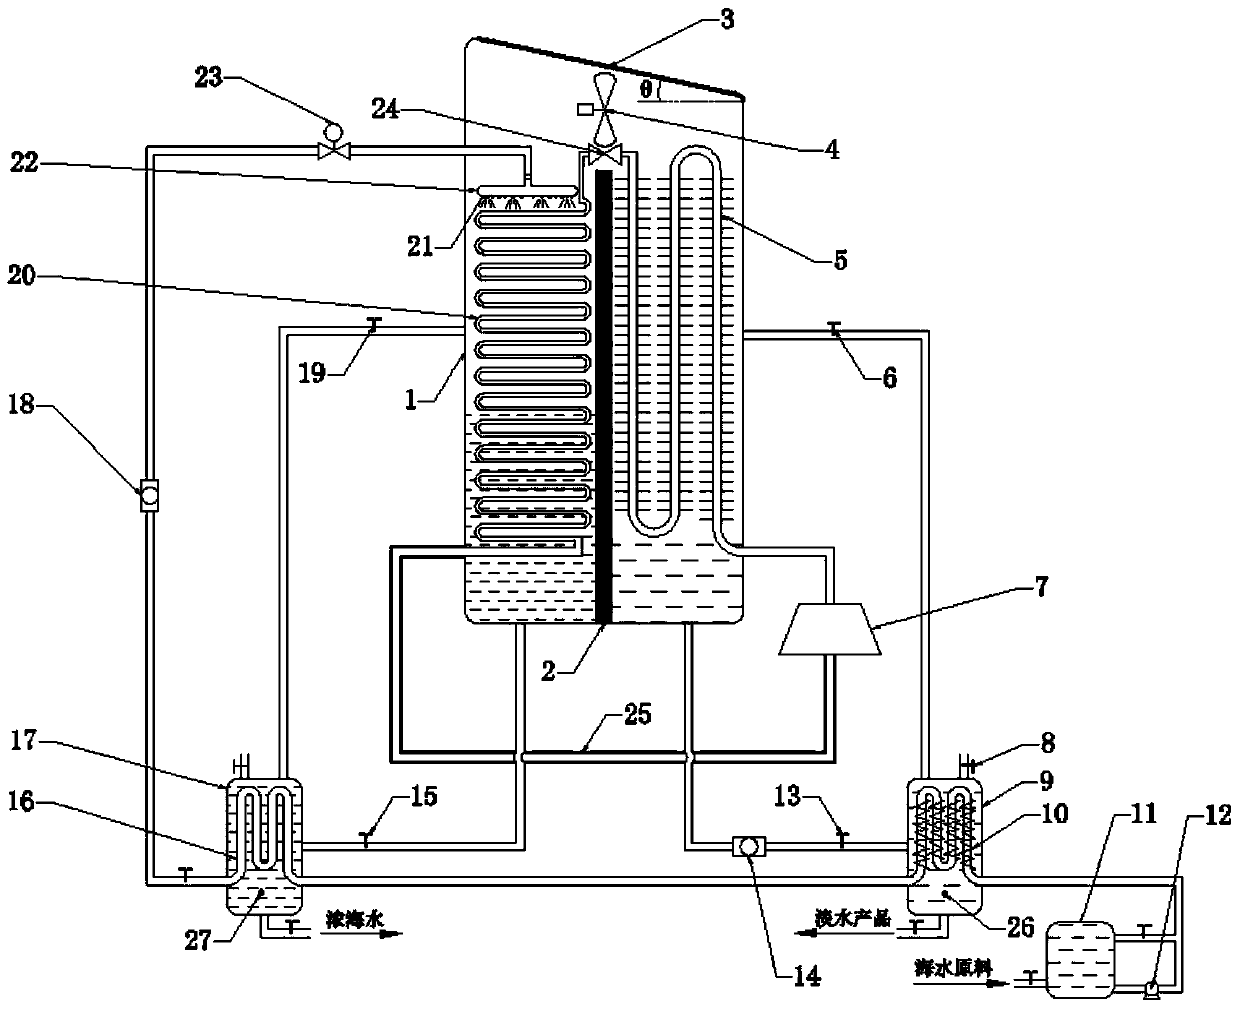 A heat pump seawater desalination device with cascade preheating and its control method